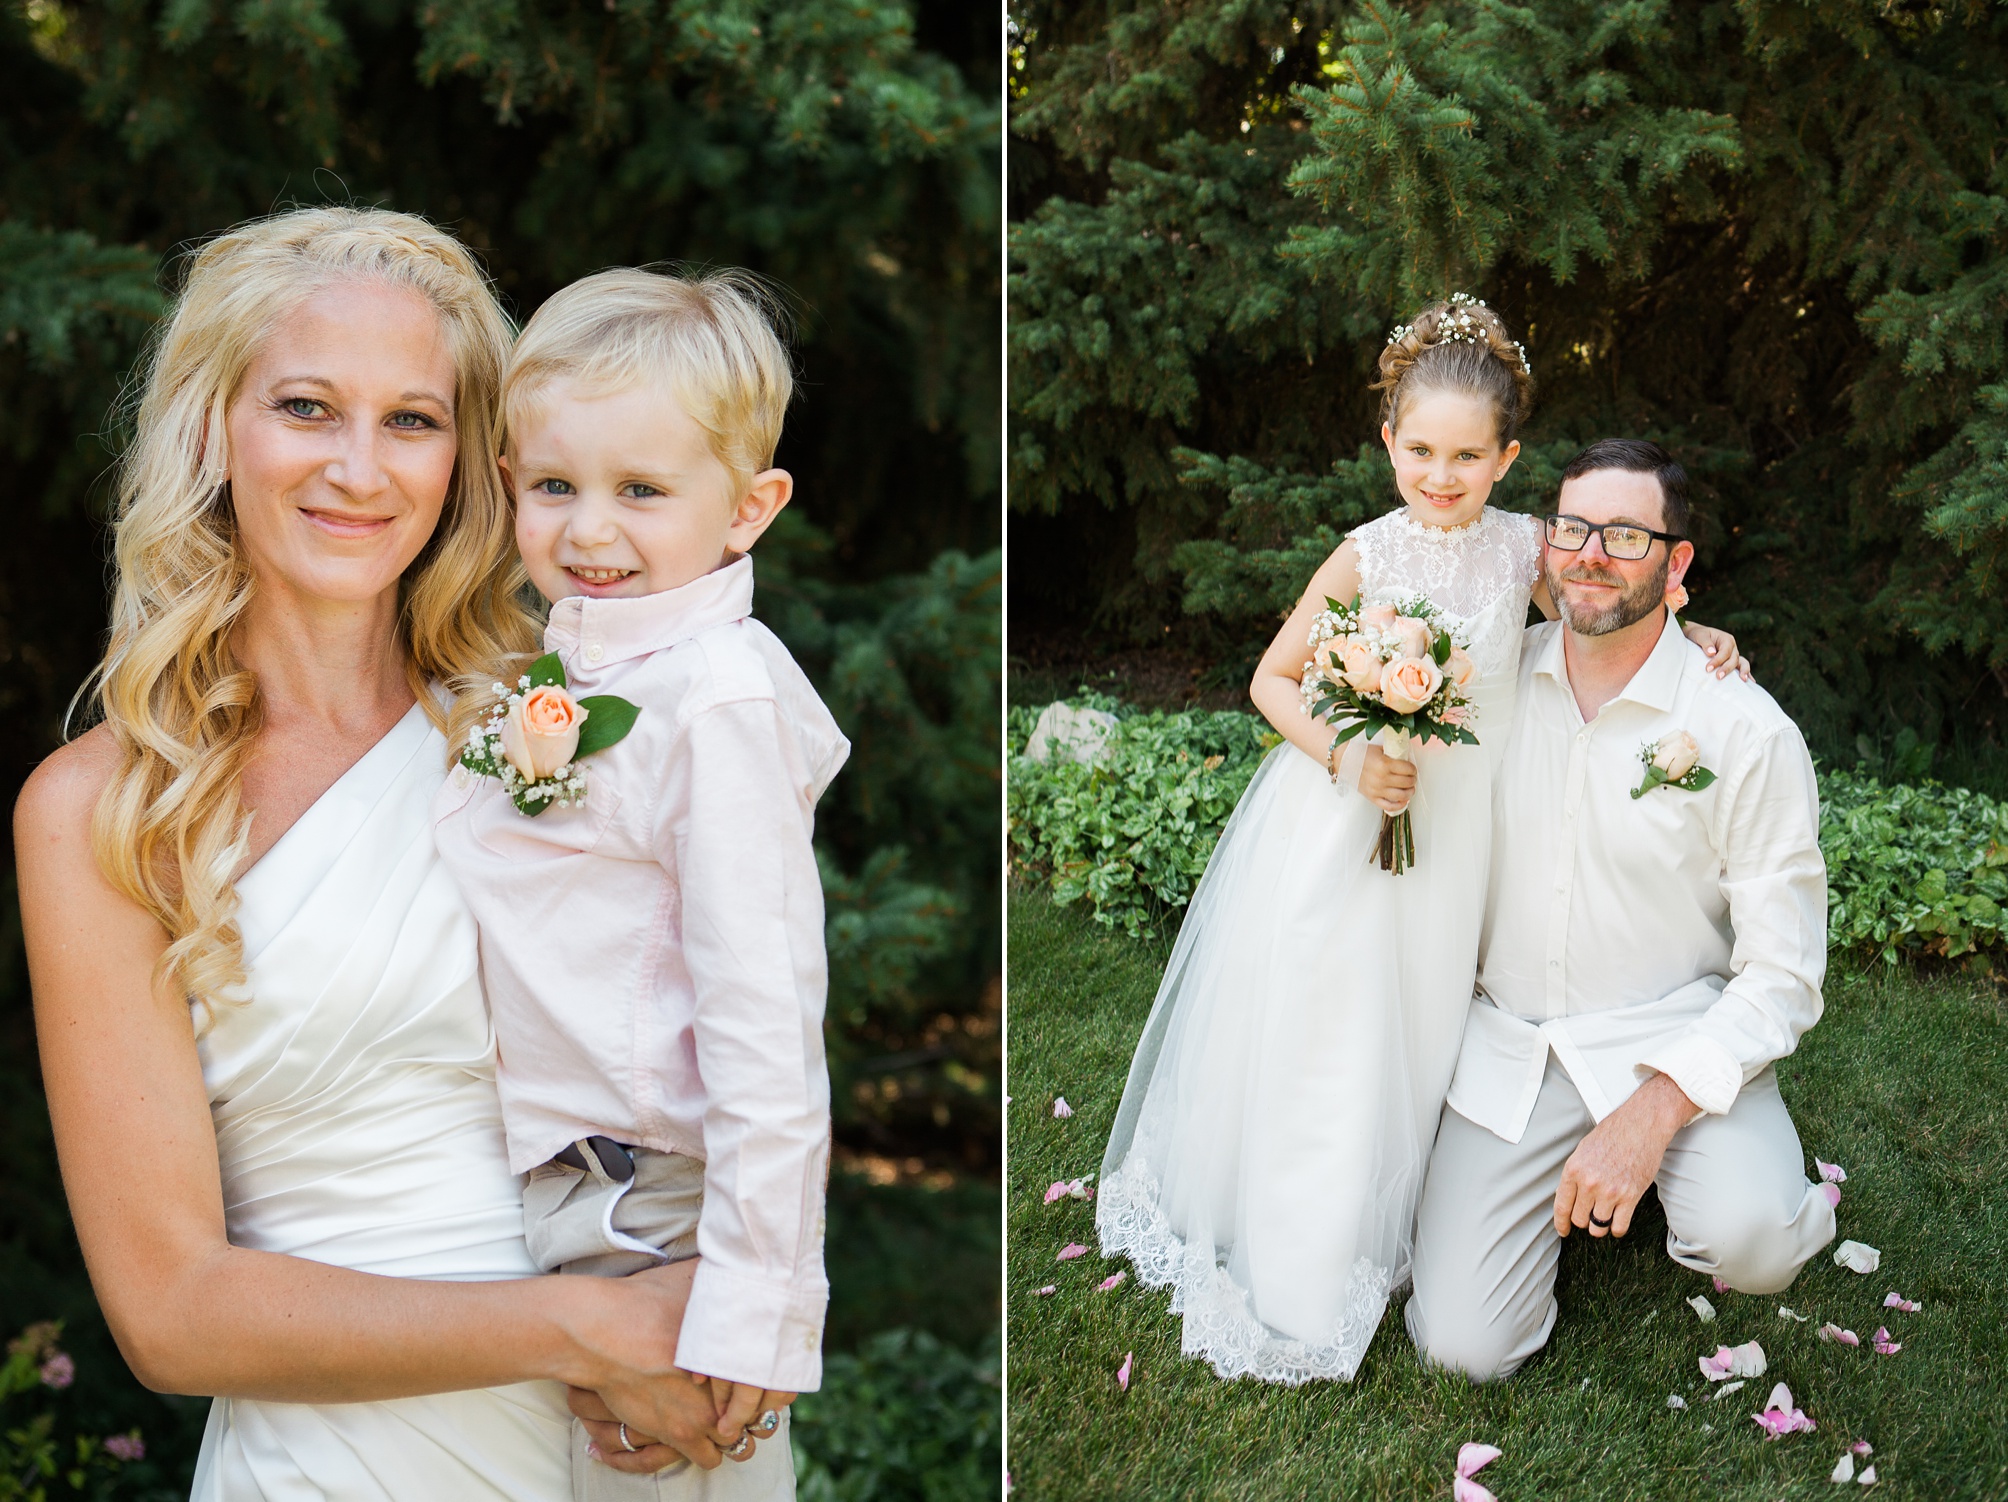 Cutest ring bearer and flower girl at this casual pink and white backyard wedding 